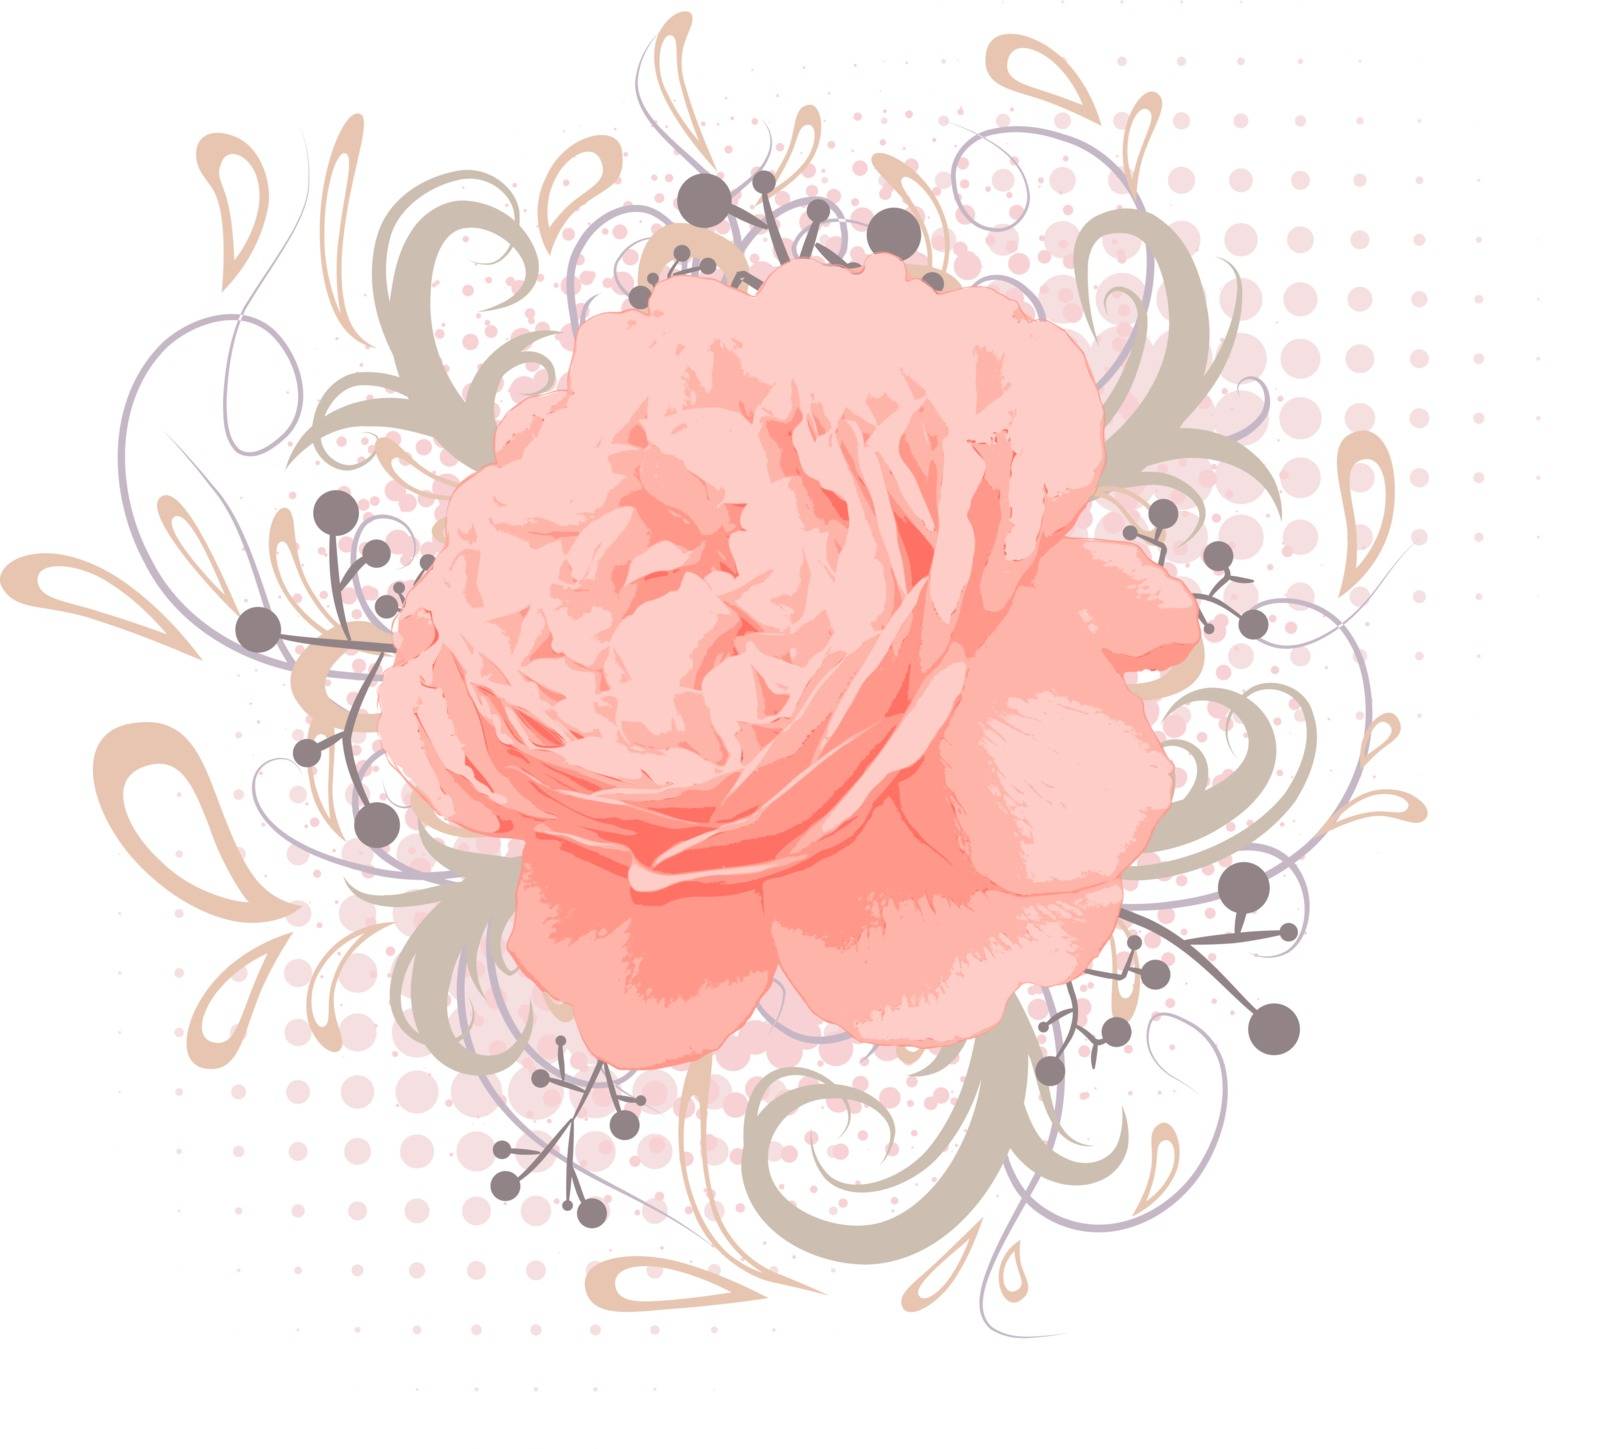 Vintage Abstract Peony Flower With Floral decoration Over White